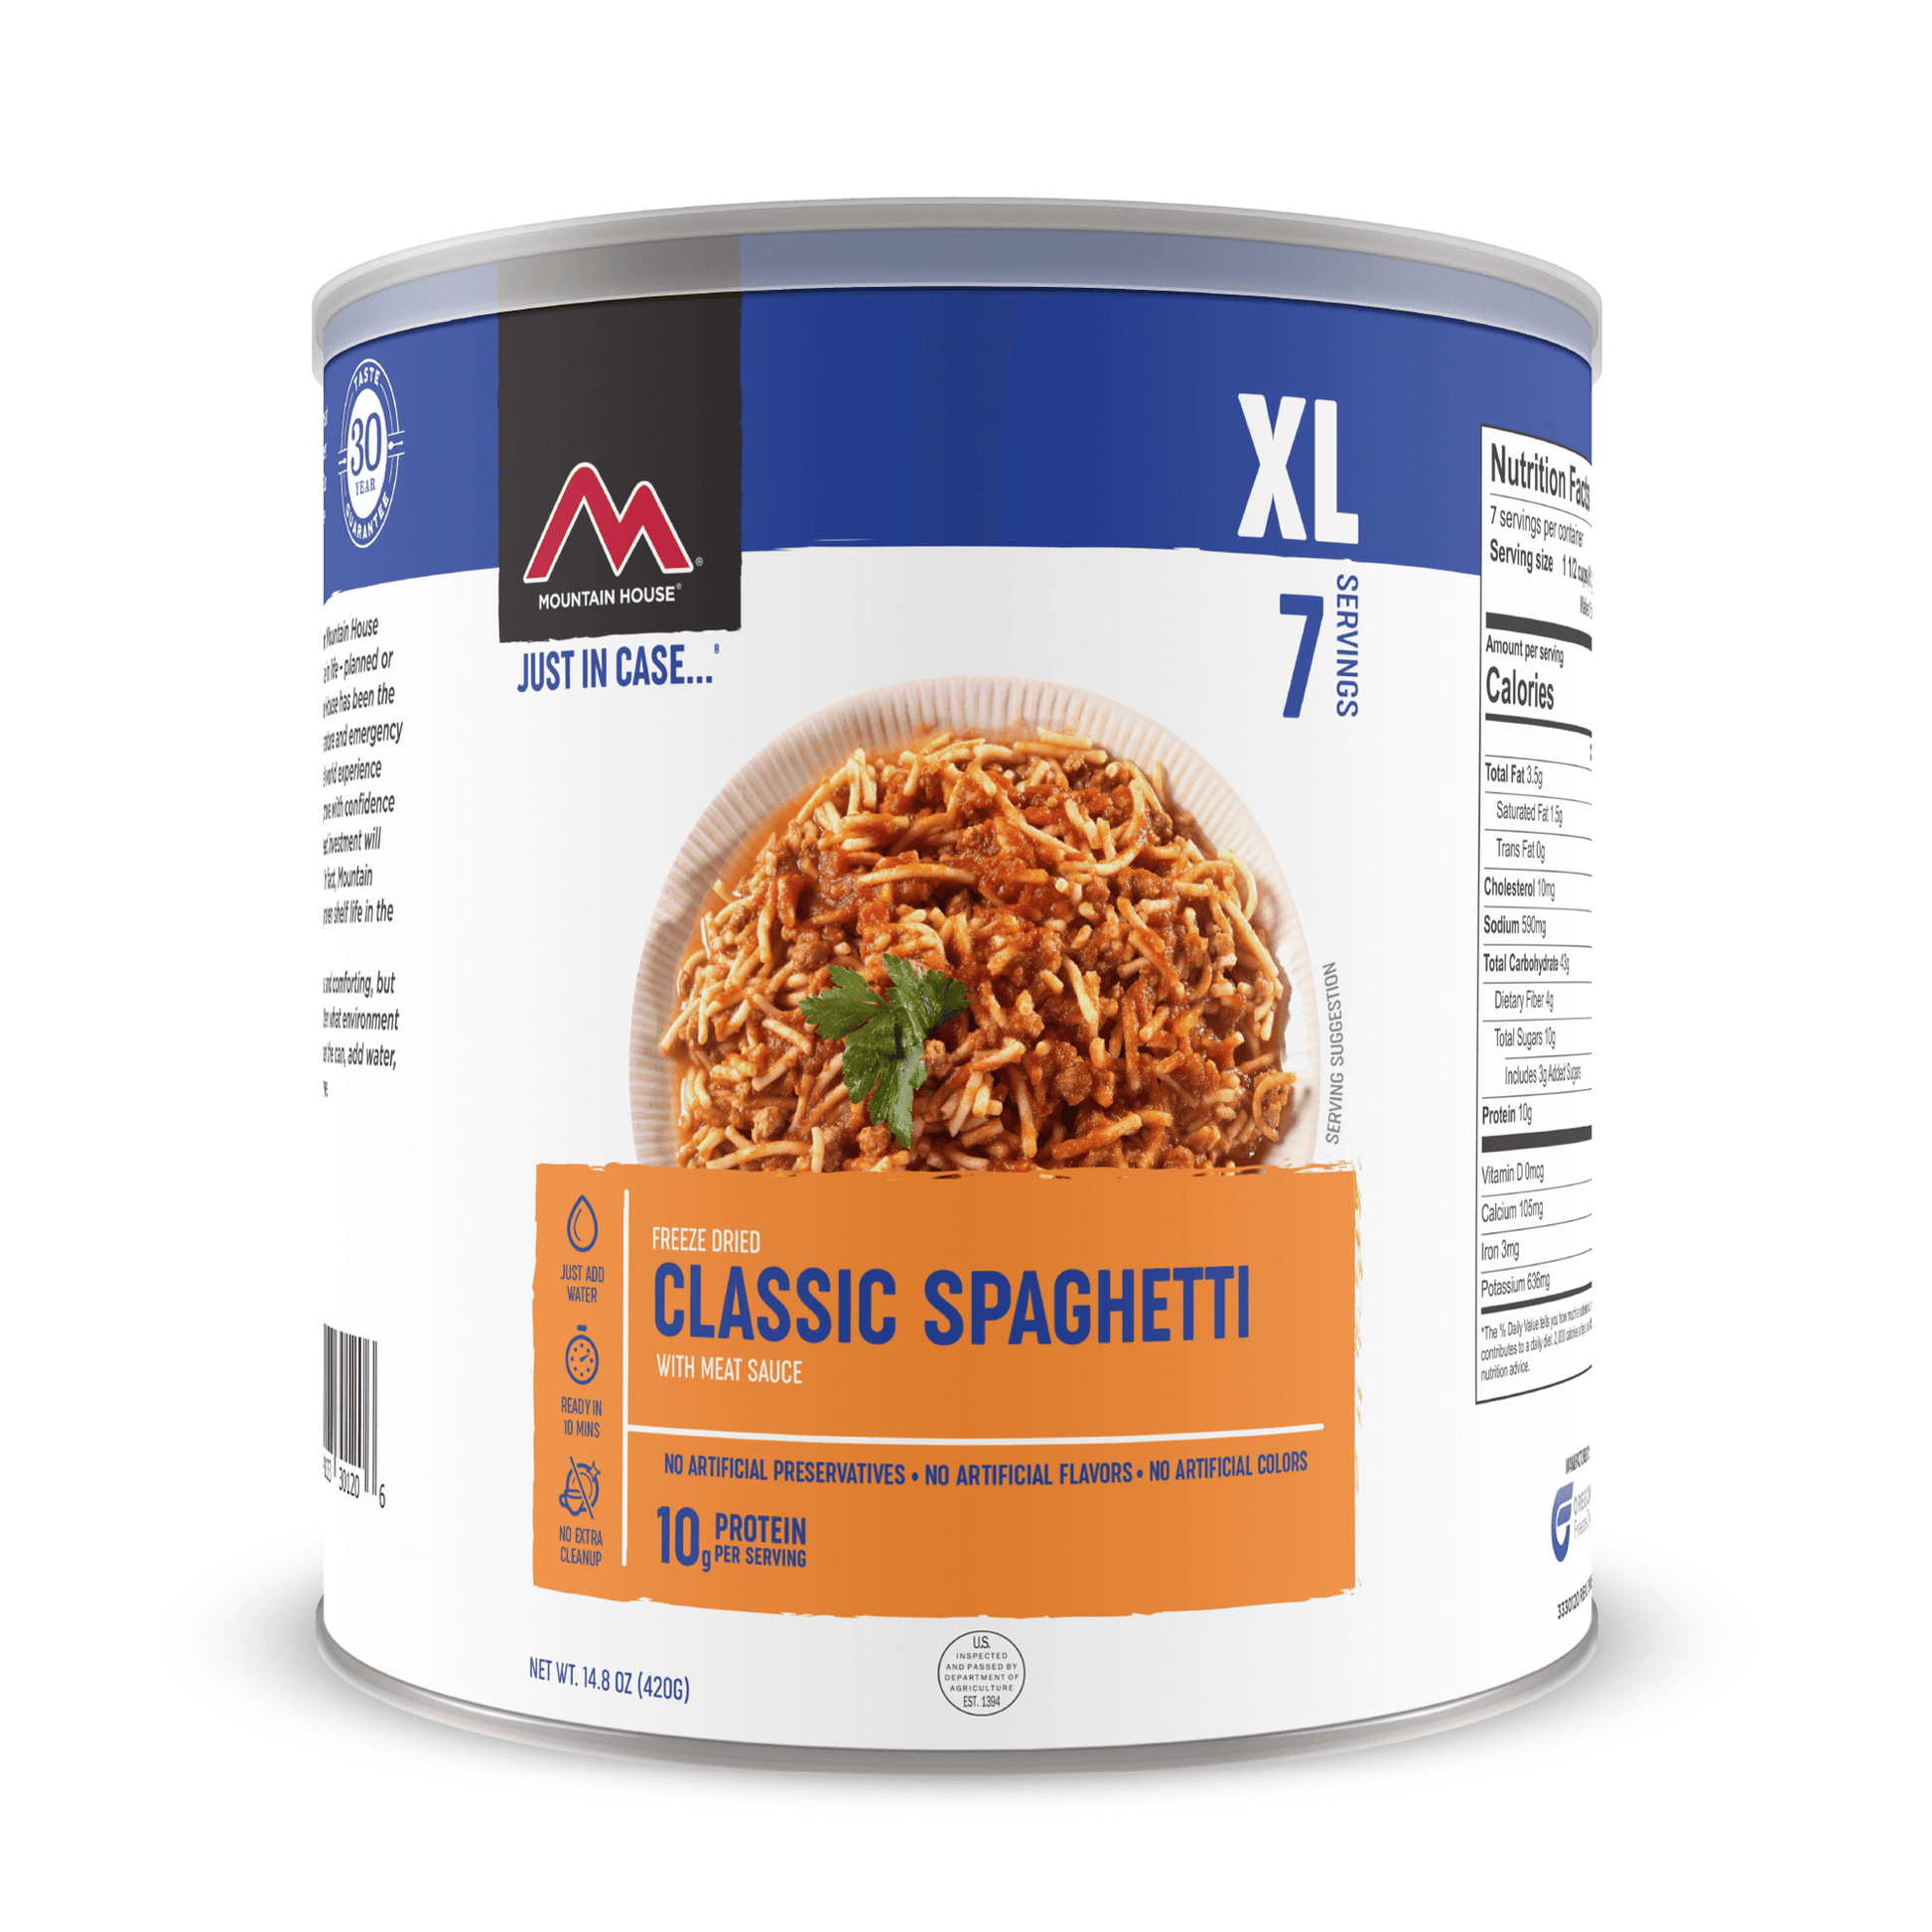 1 x Classic Spaghetti with Meat Sauce (7 servings)